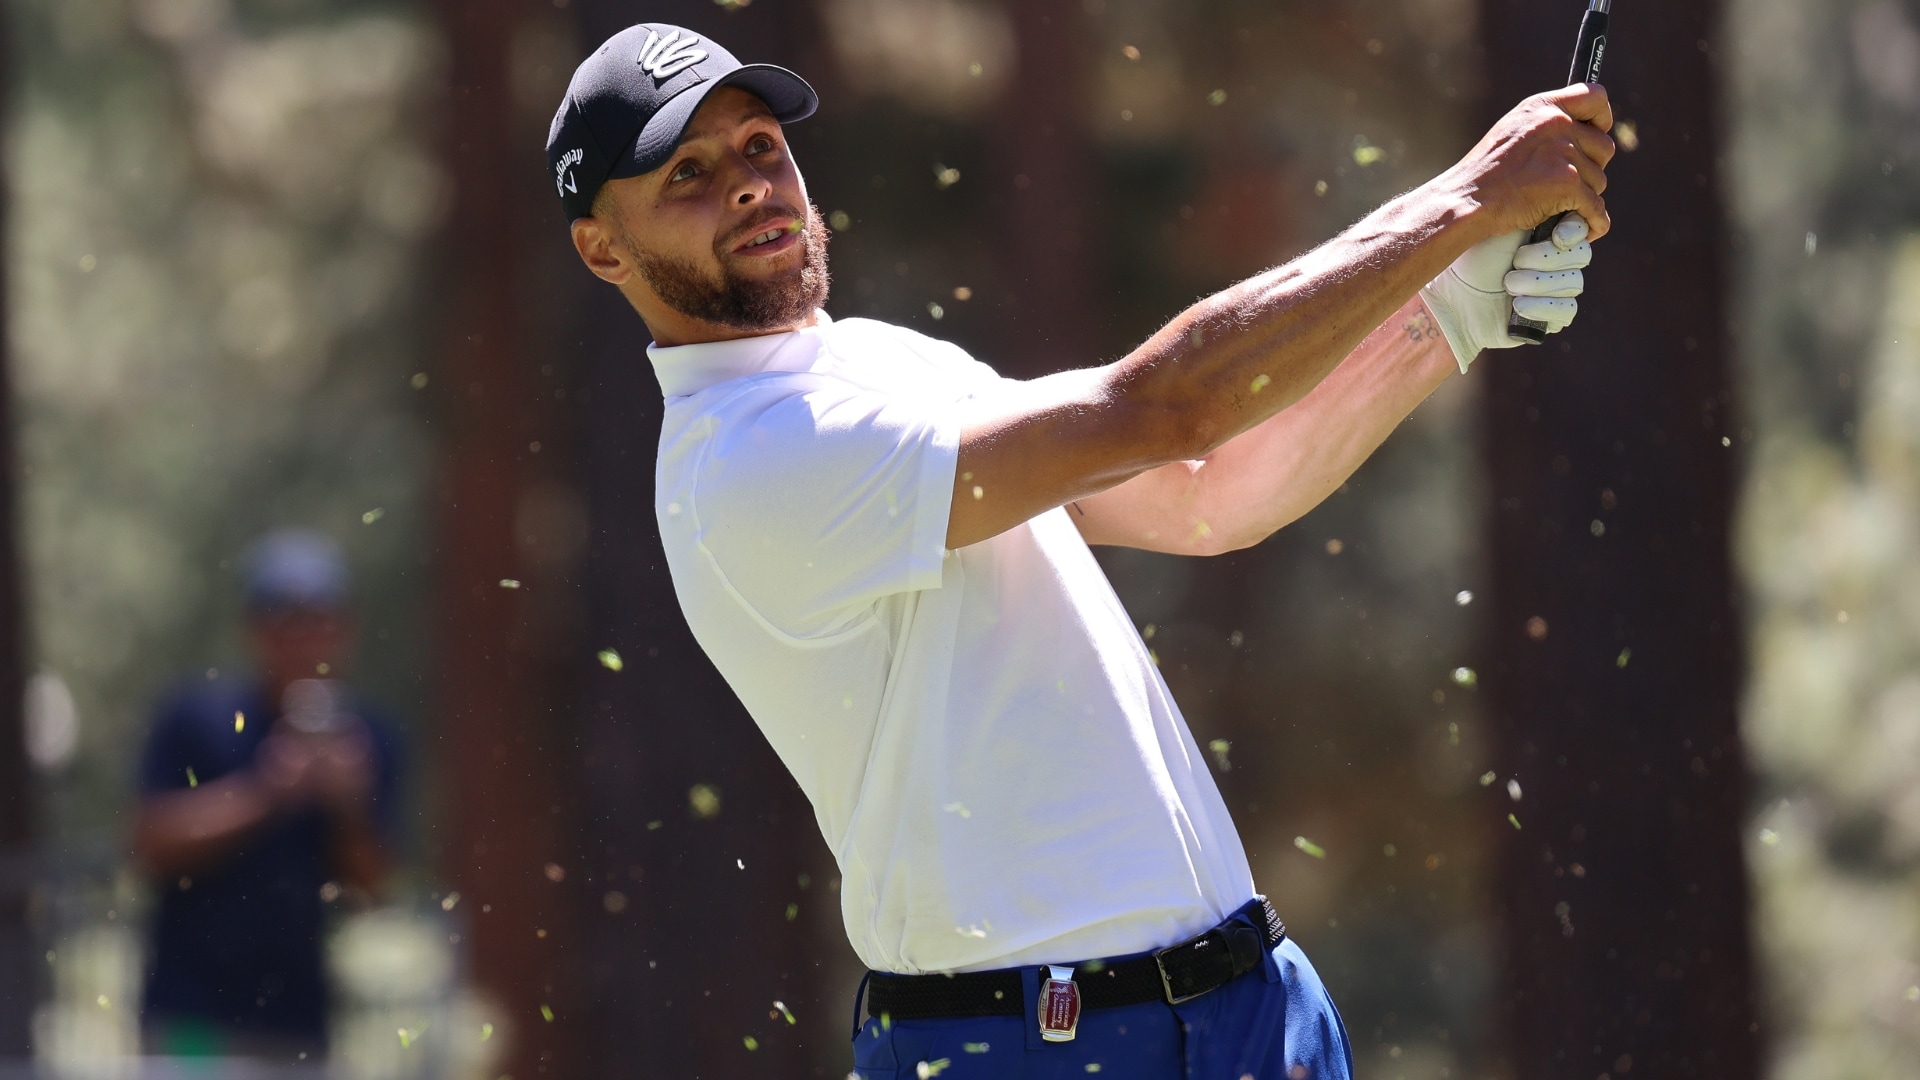 Stephen Curry makes hole-in-one, leads star-studded field at American Century celebrity golf tourney